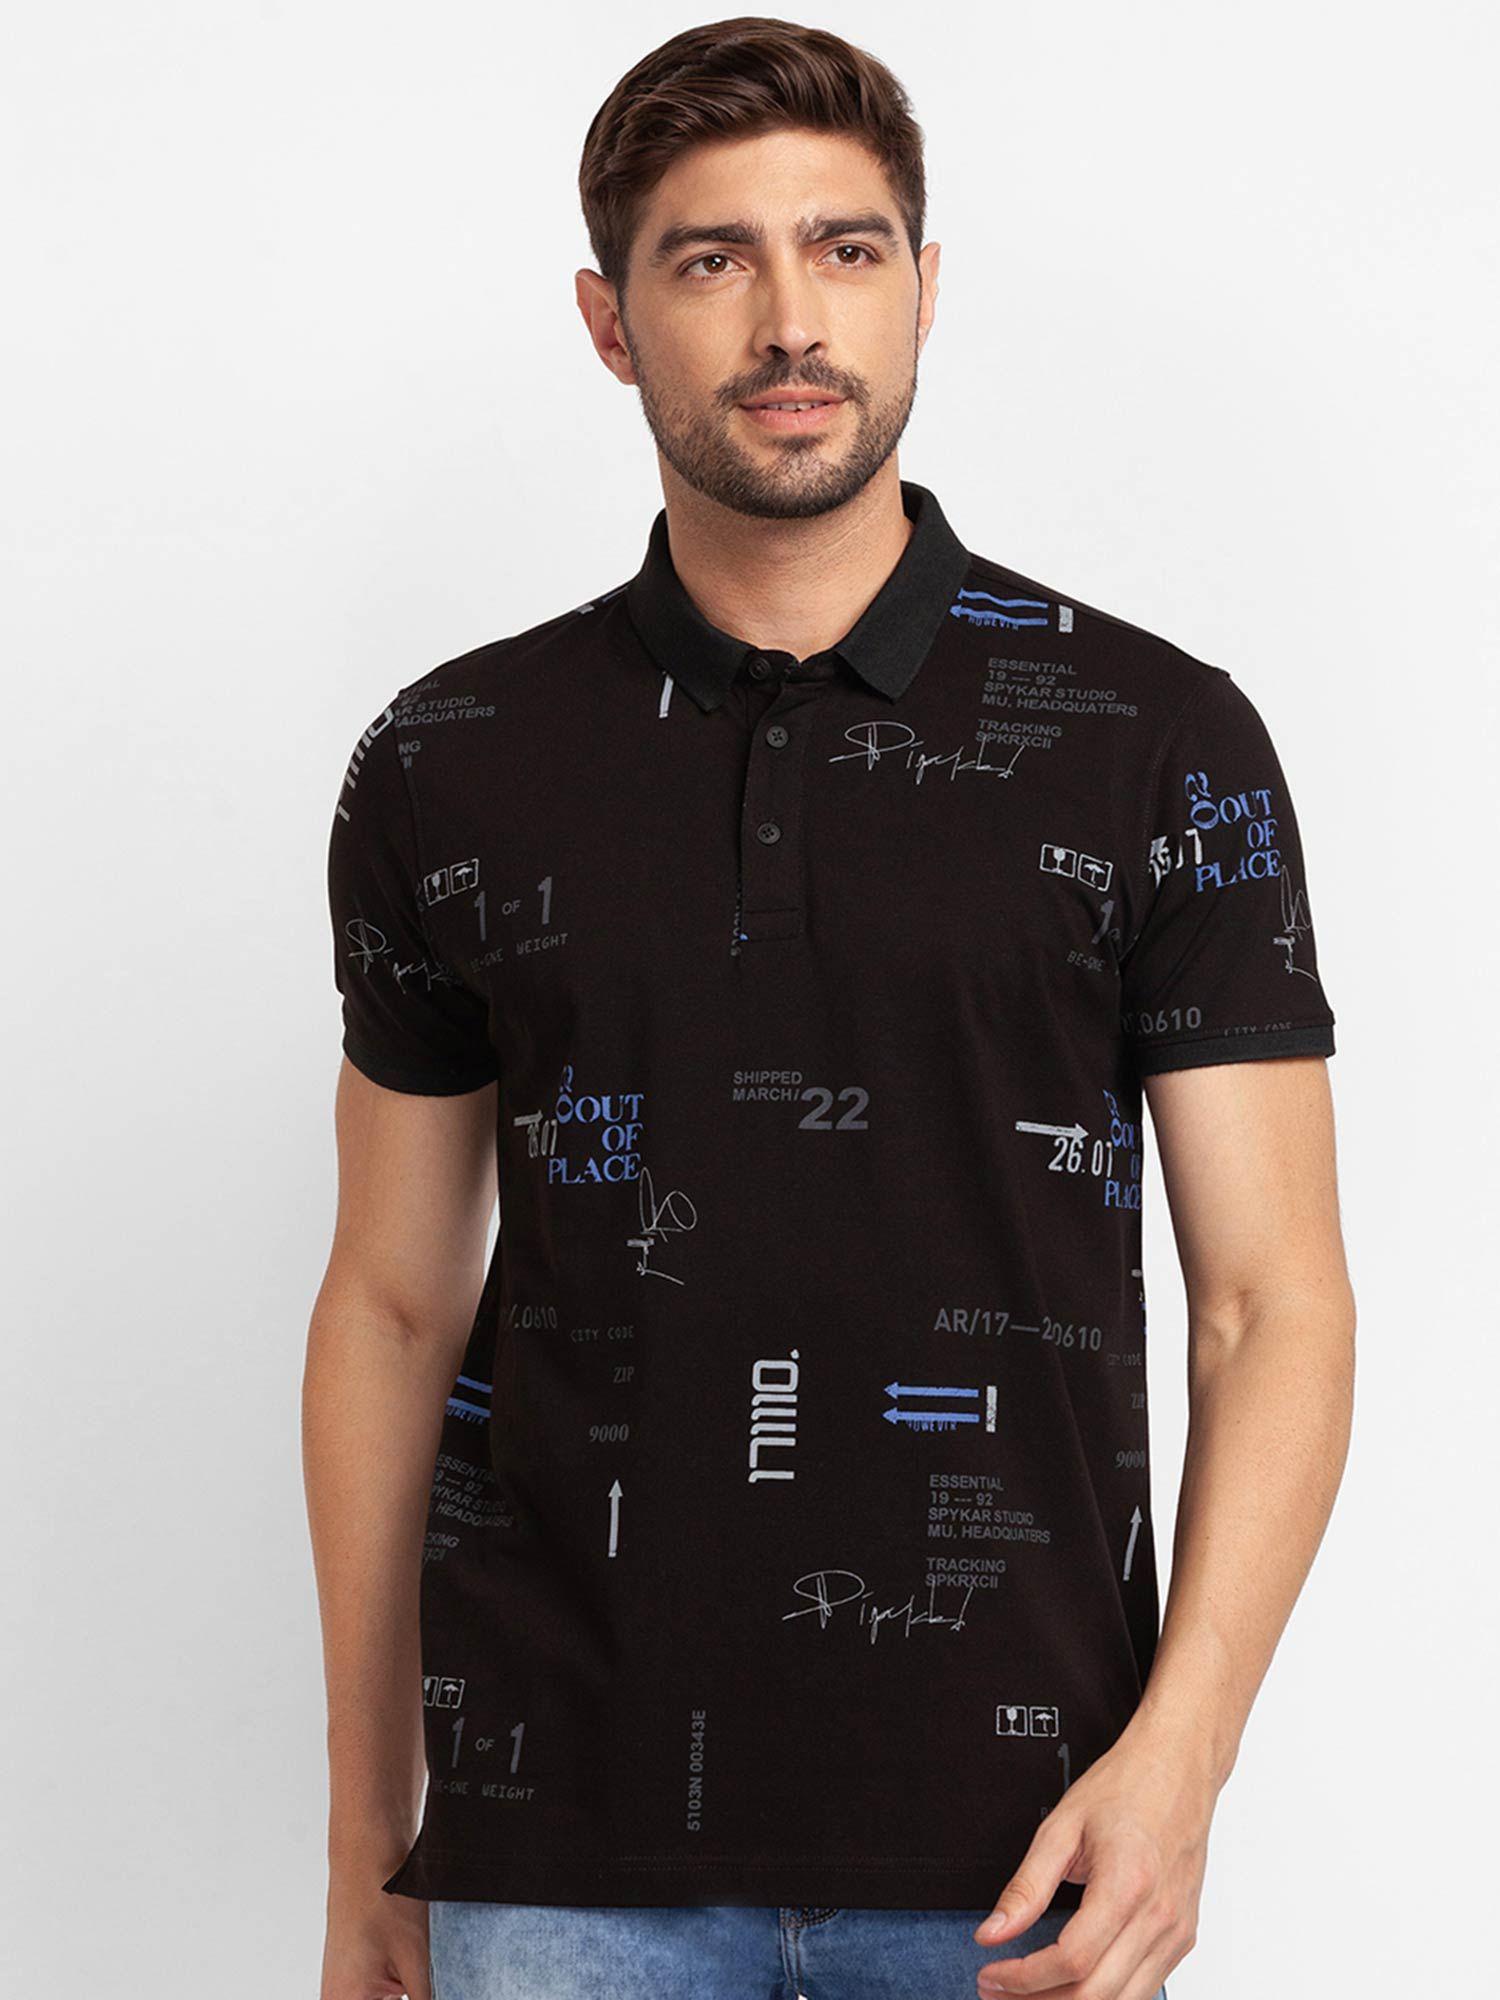 black cotton half sleeve printed casual polo t-shirt for men